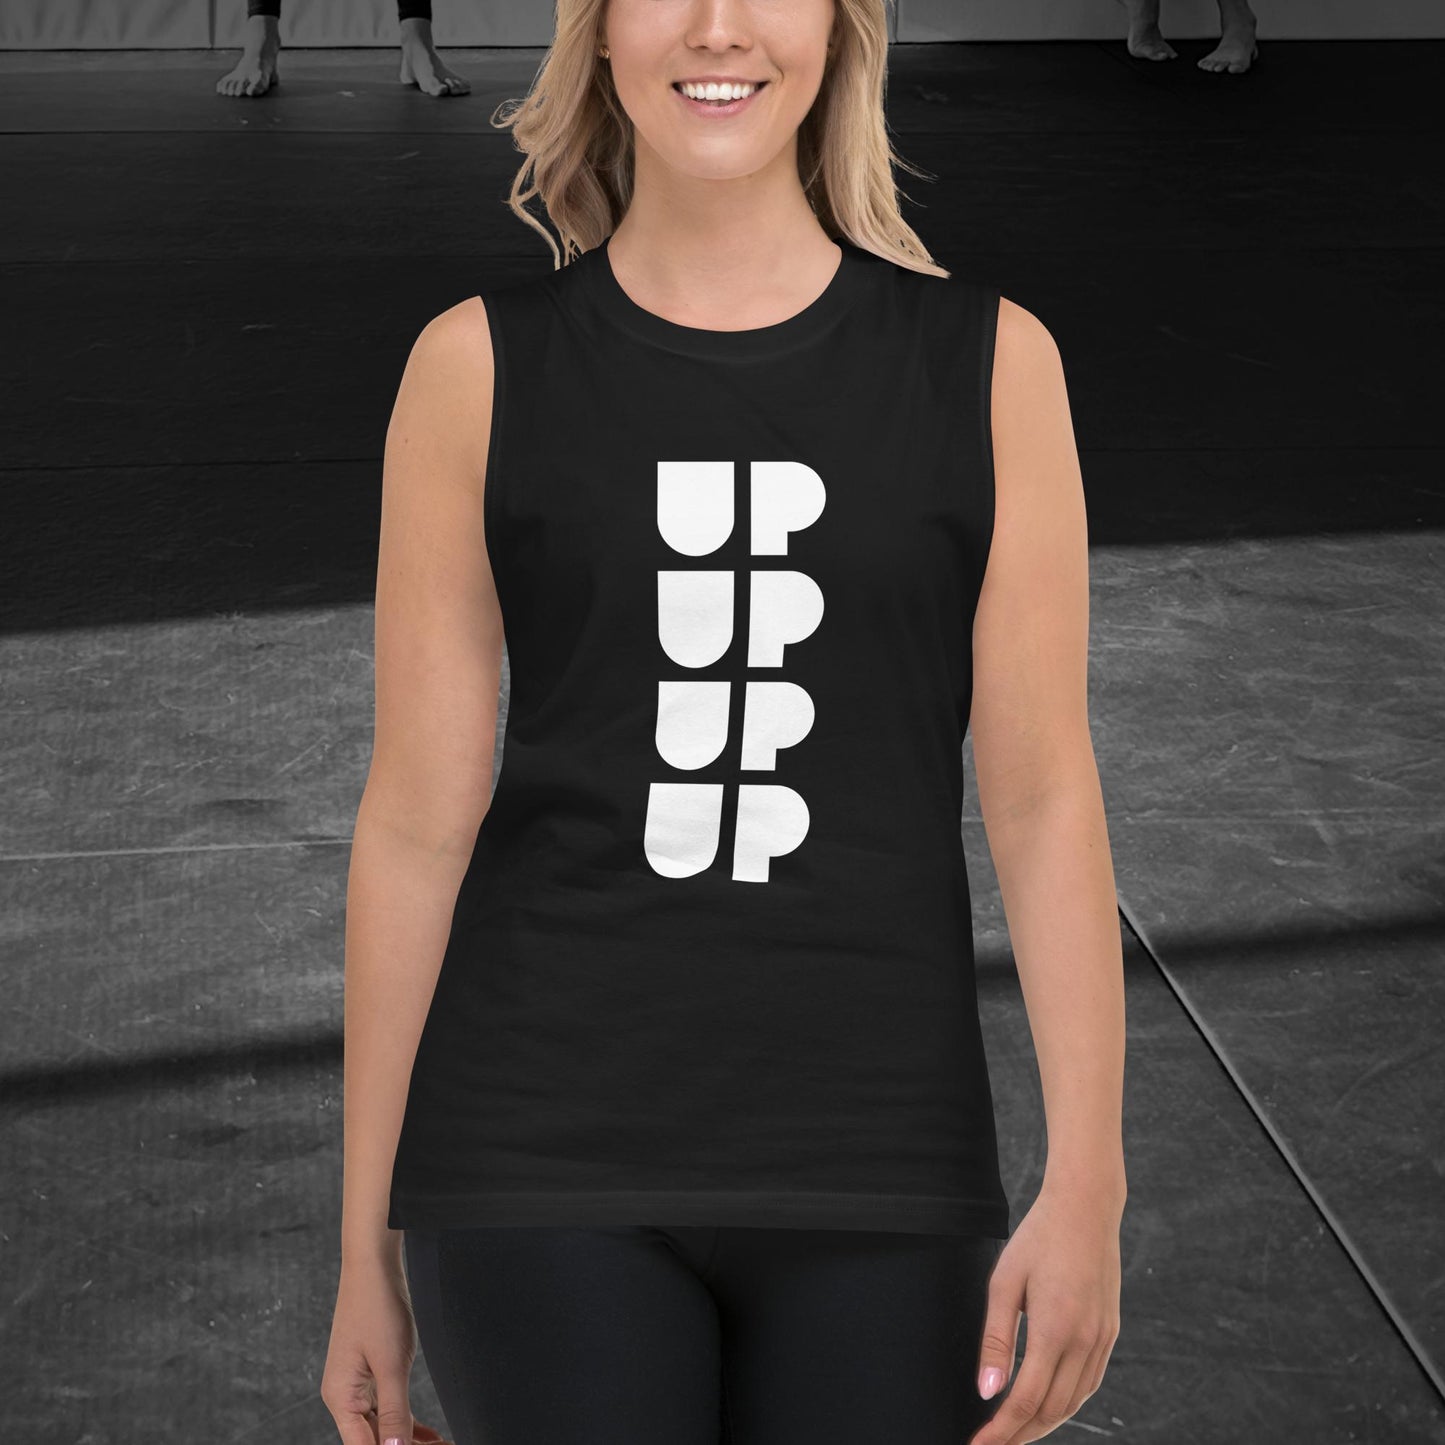 UP UP UP UP, Unisex Muscle Shirt